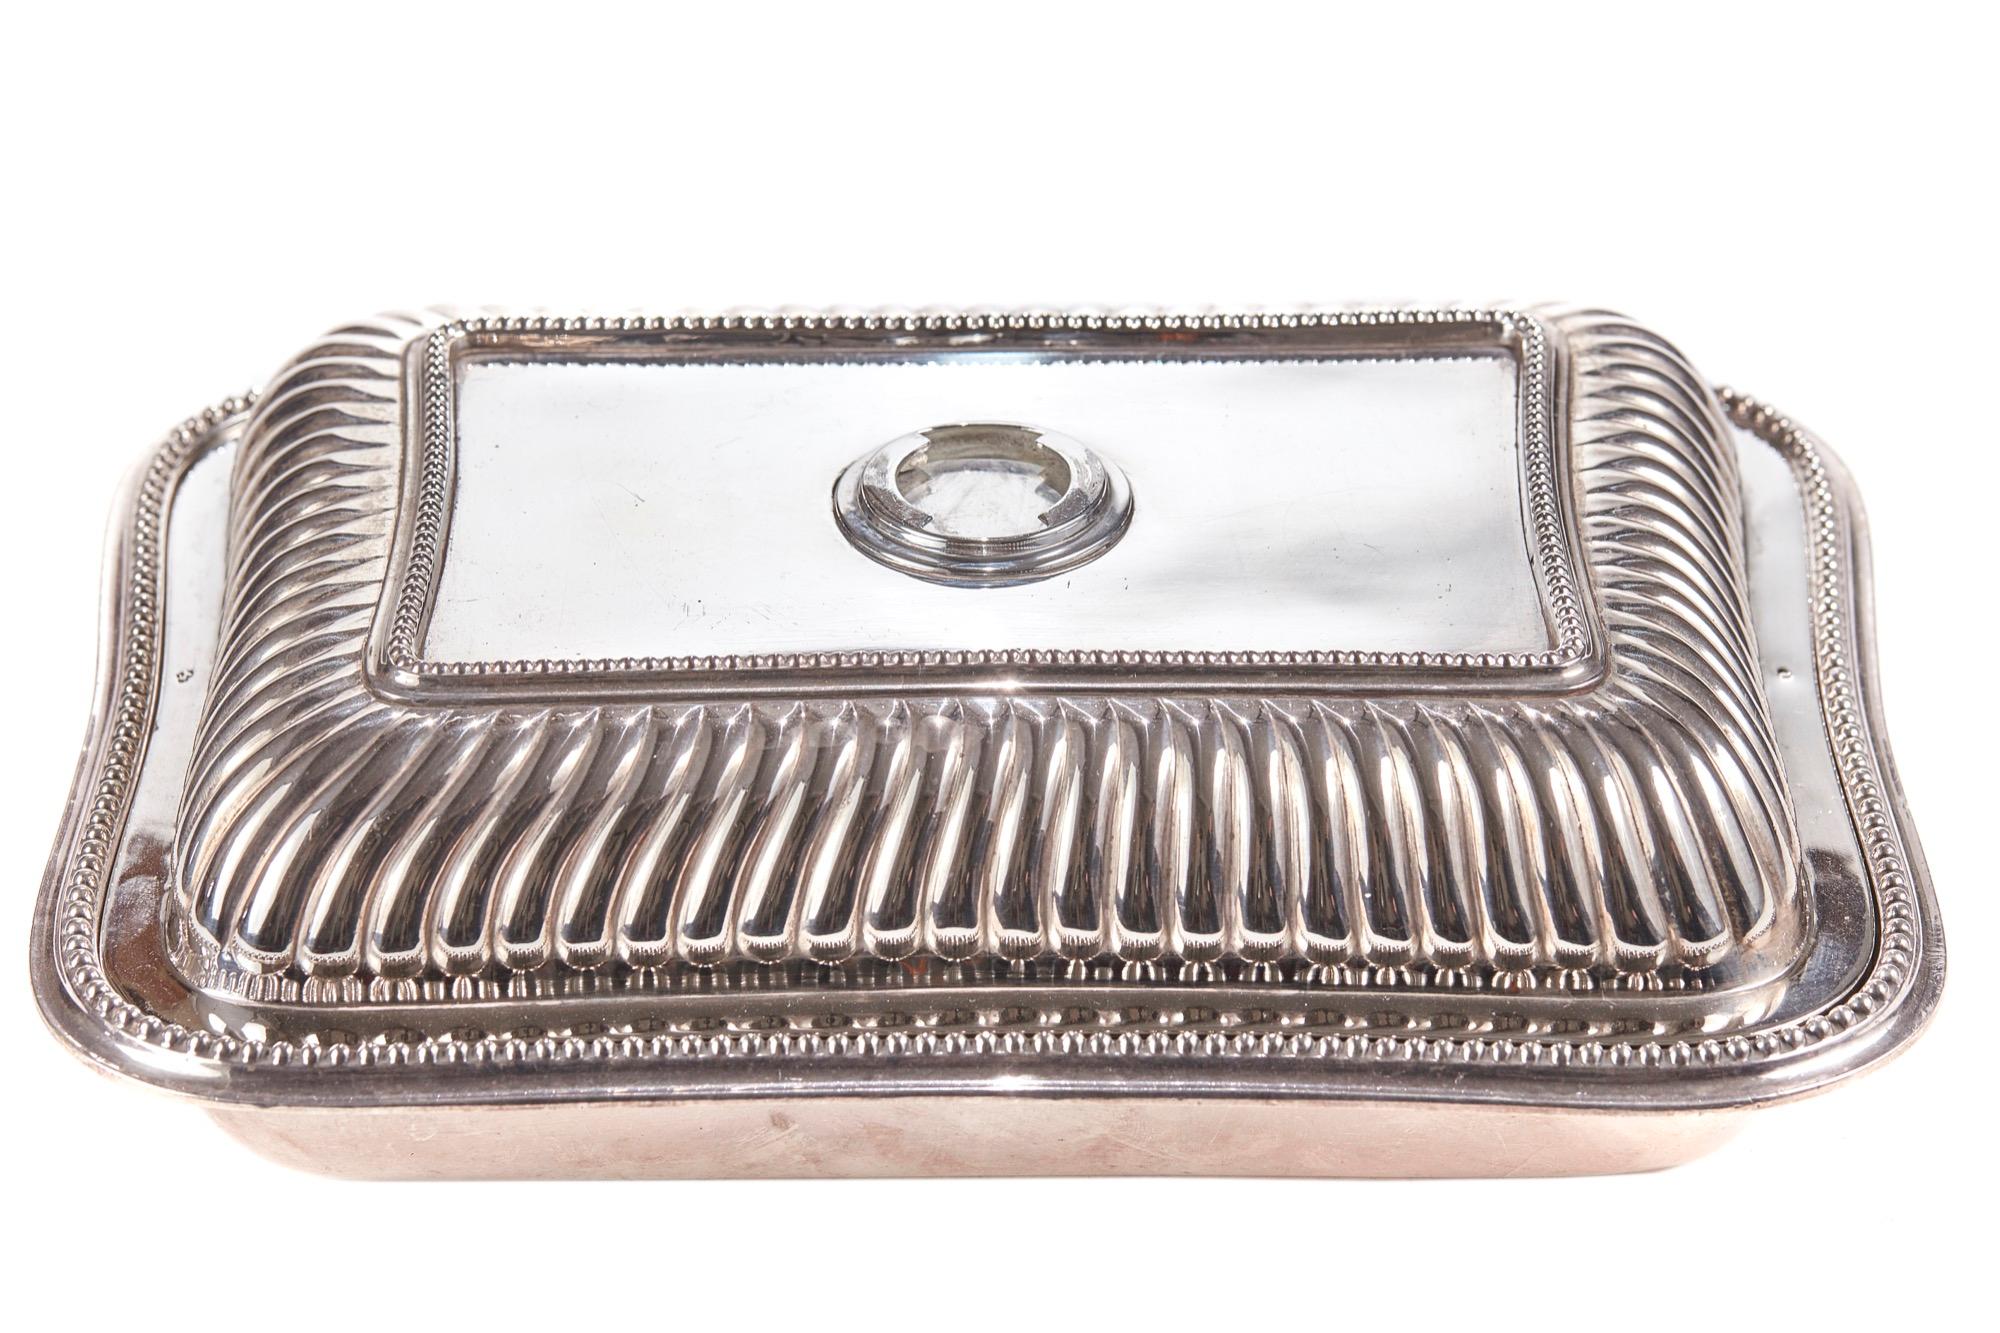 Offered for sale is this 19th century antique silver plated entree dish which has a lovely reeded lid and shaped handle. It is in perfect condition.